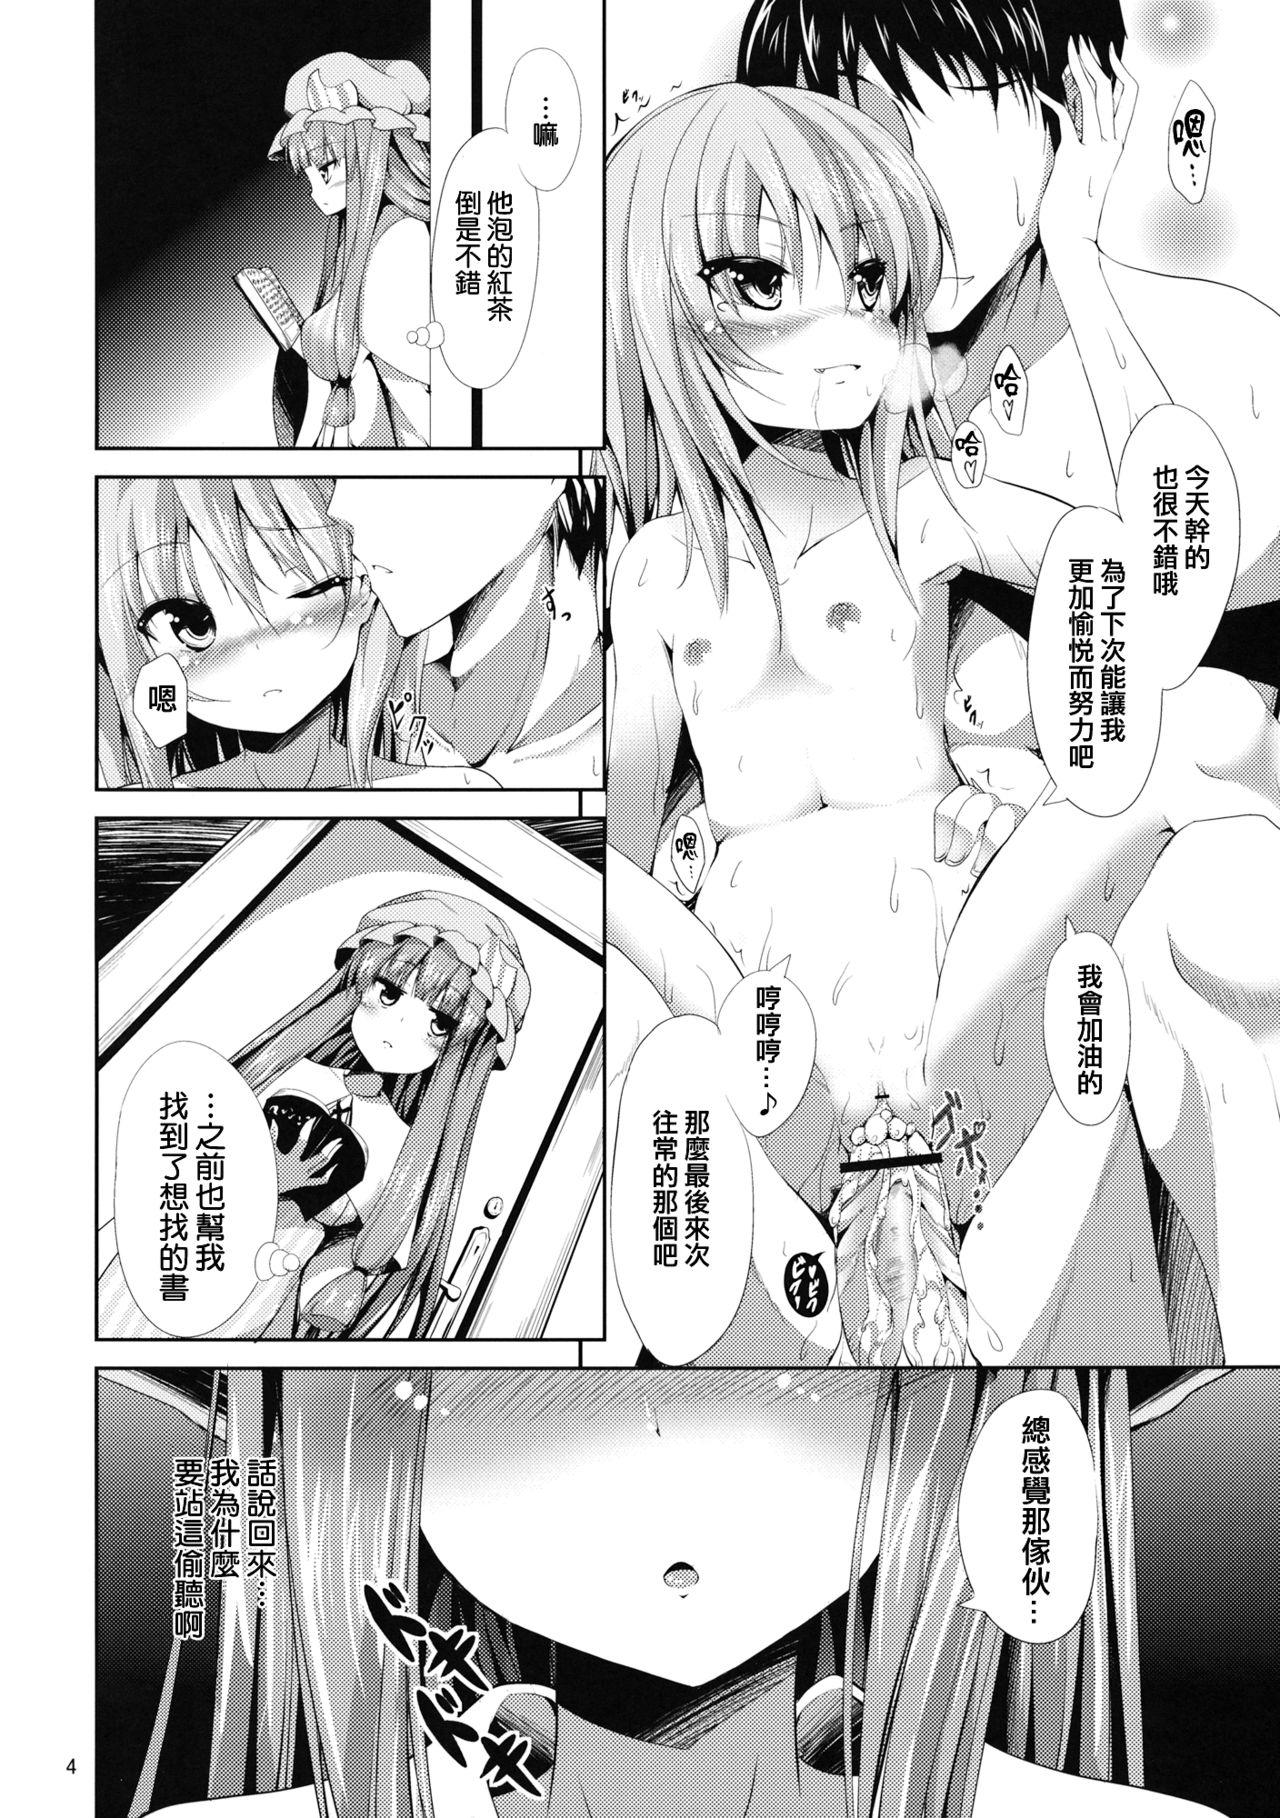 Gay Boyporn Sweet nothingS - Touhou project Exgirlfriend - Page 4